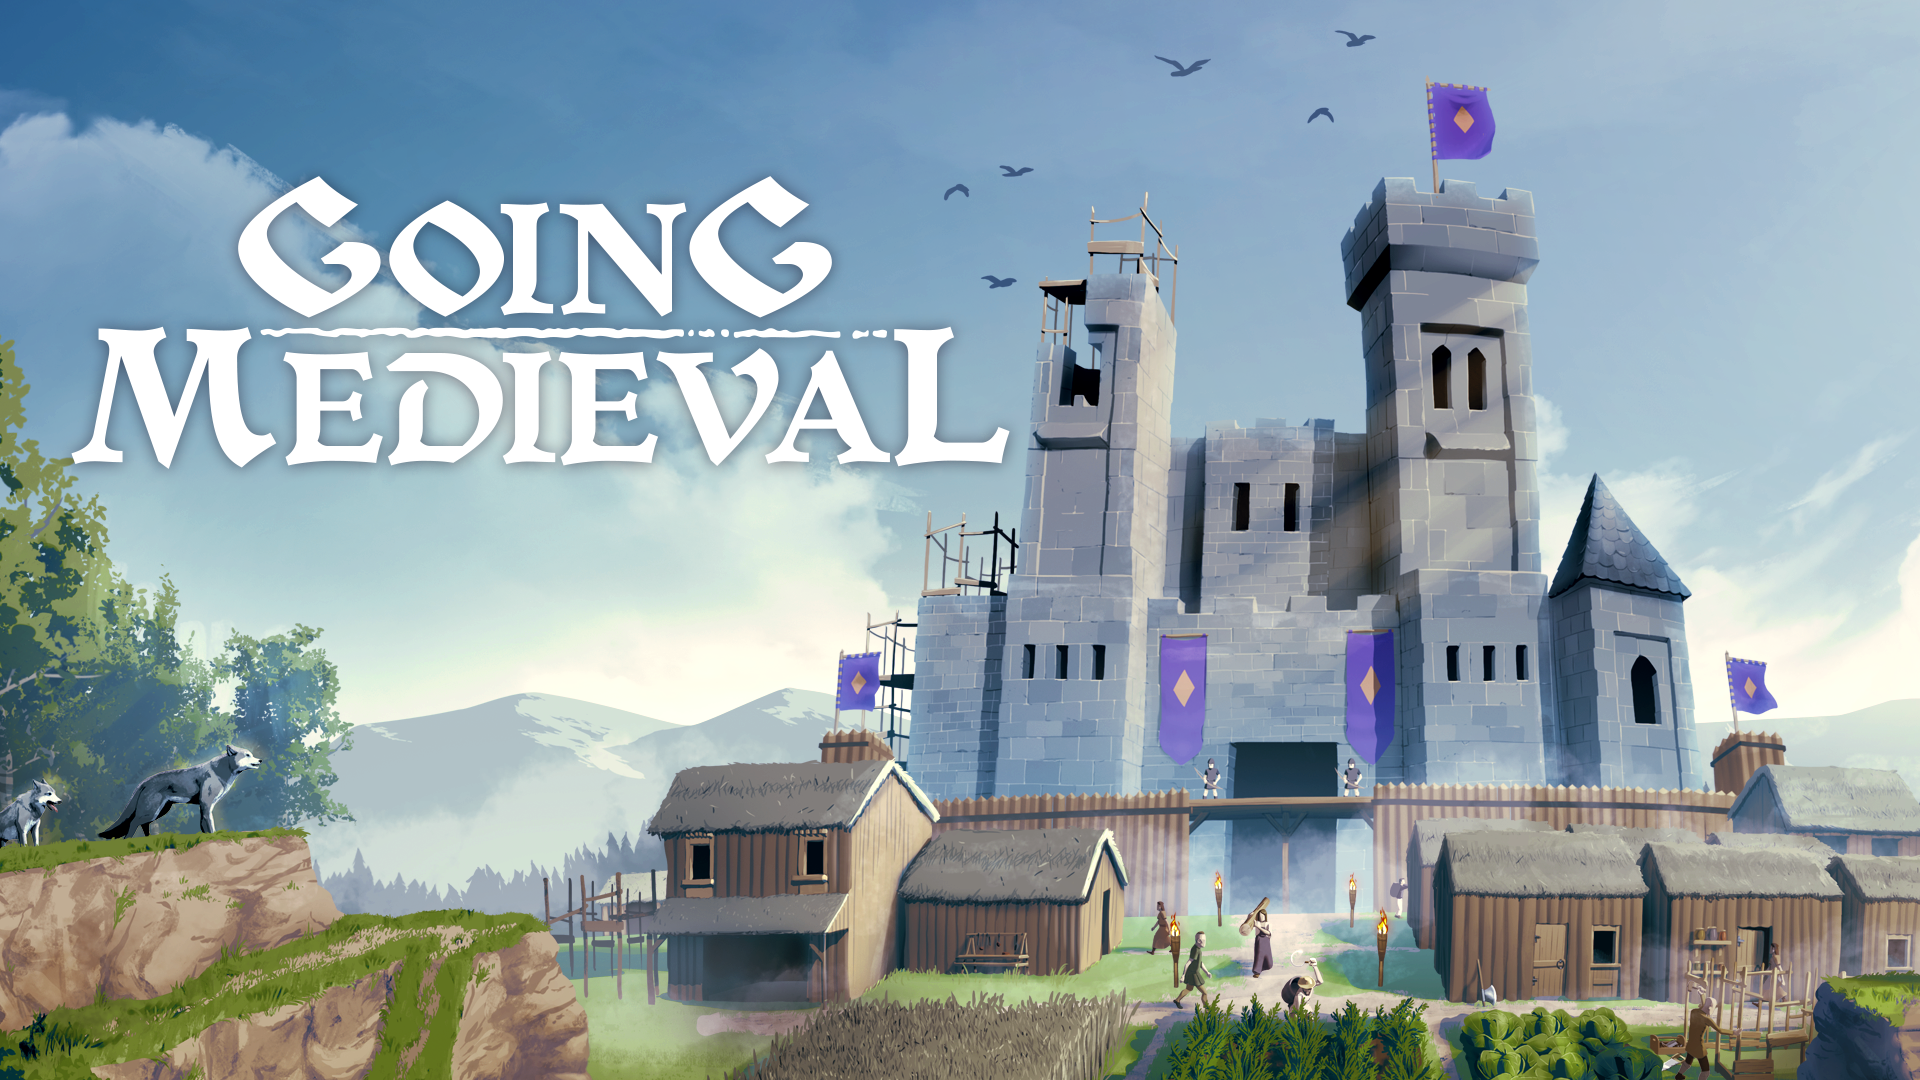 Irregular Corporation. Going Medieval launches on June 1st! ⚒